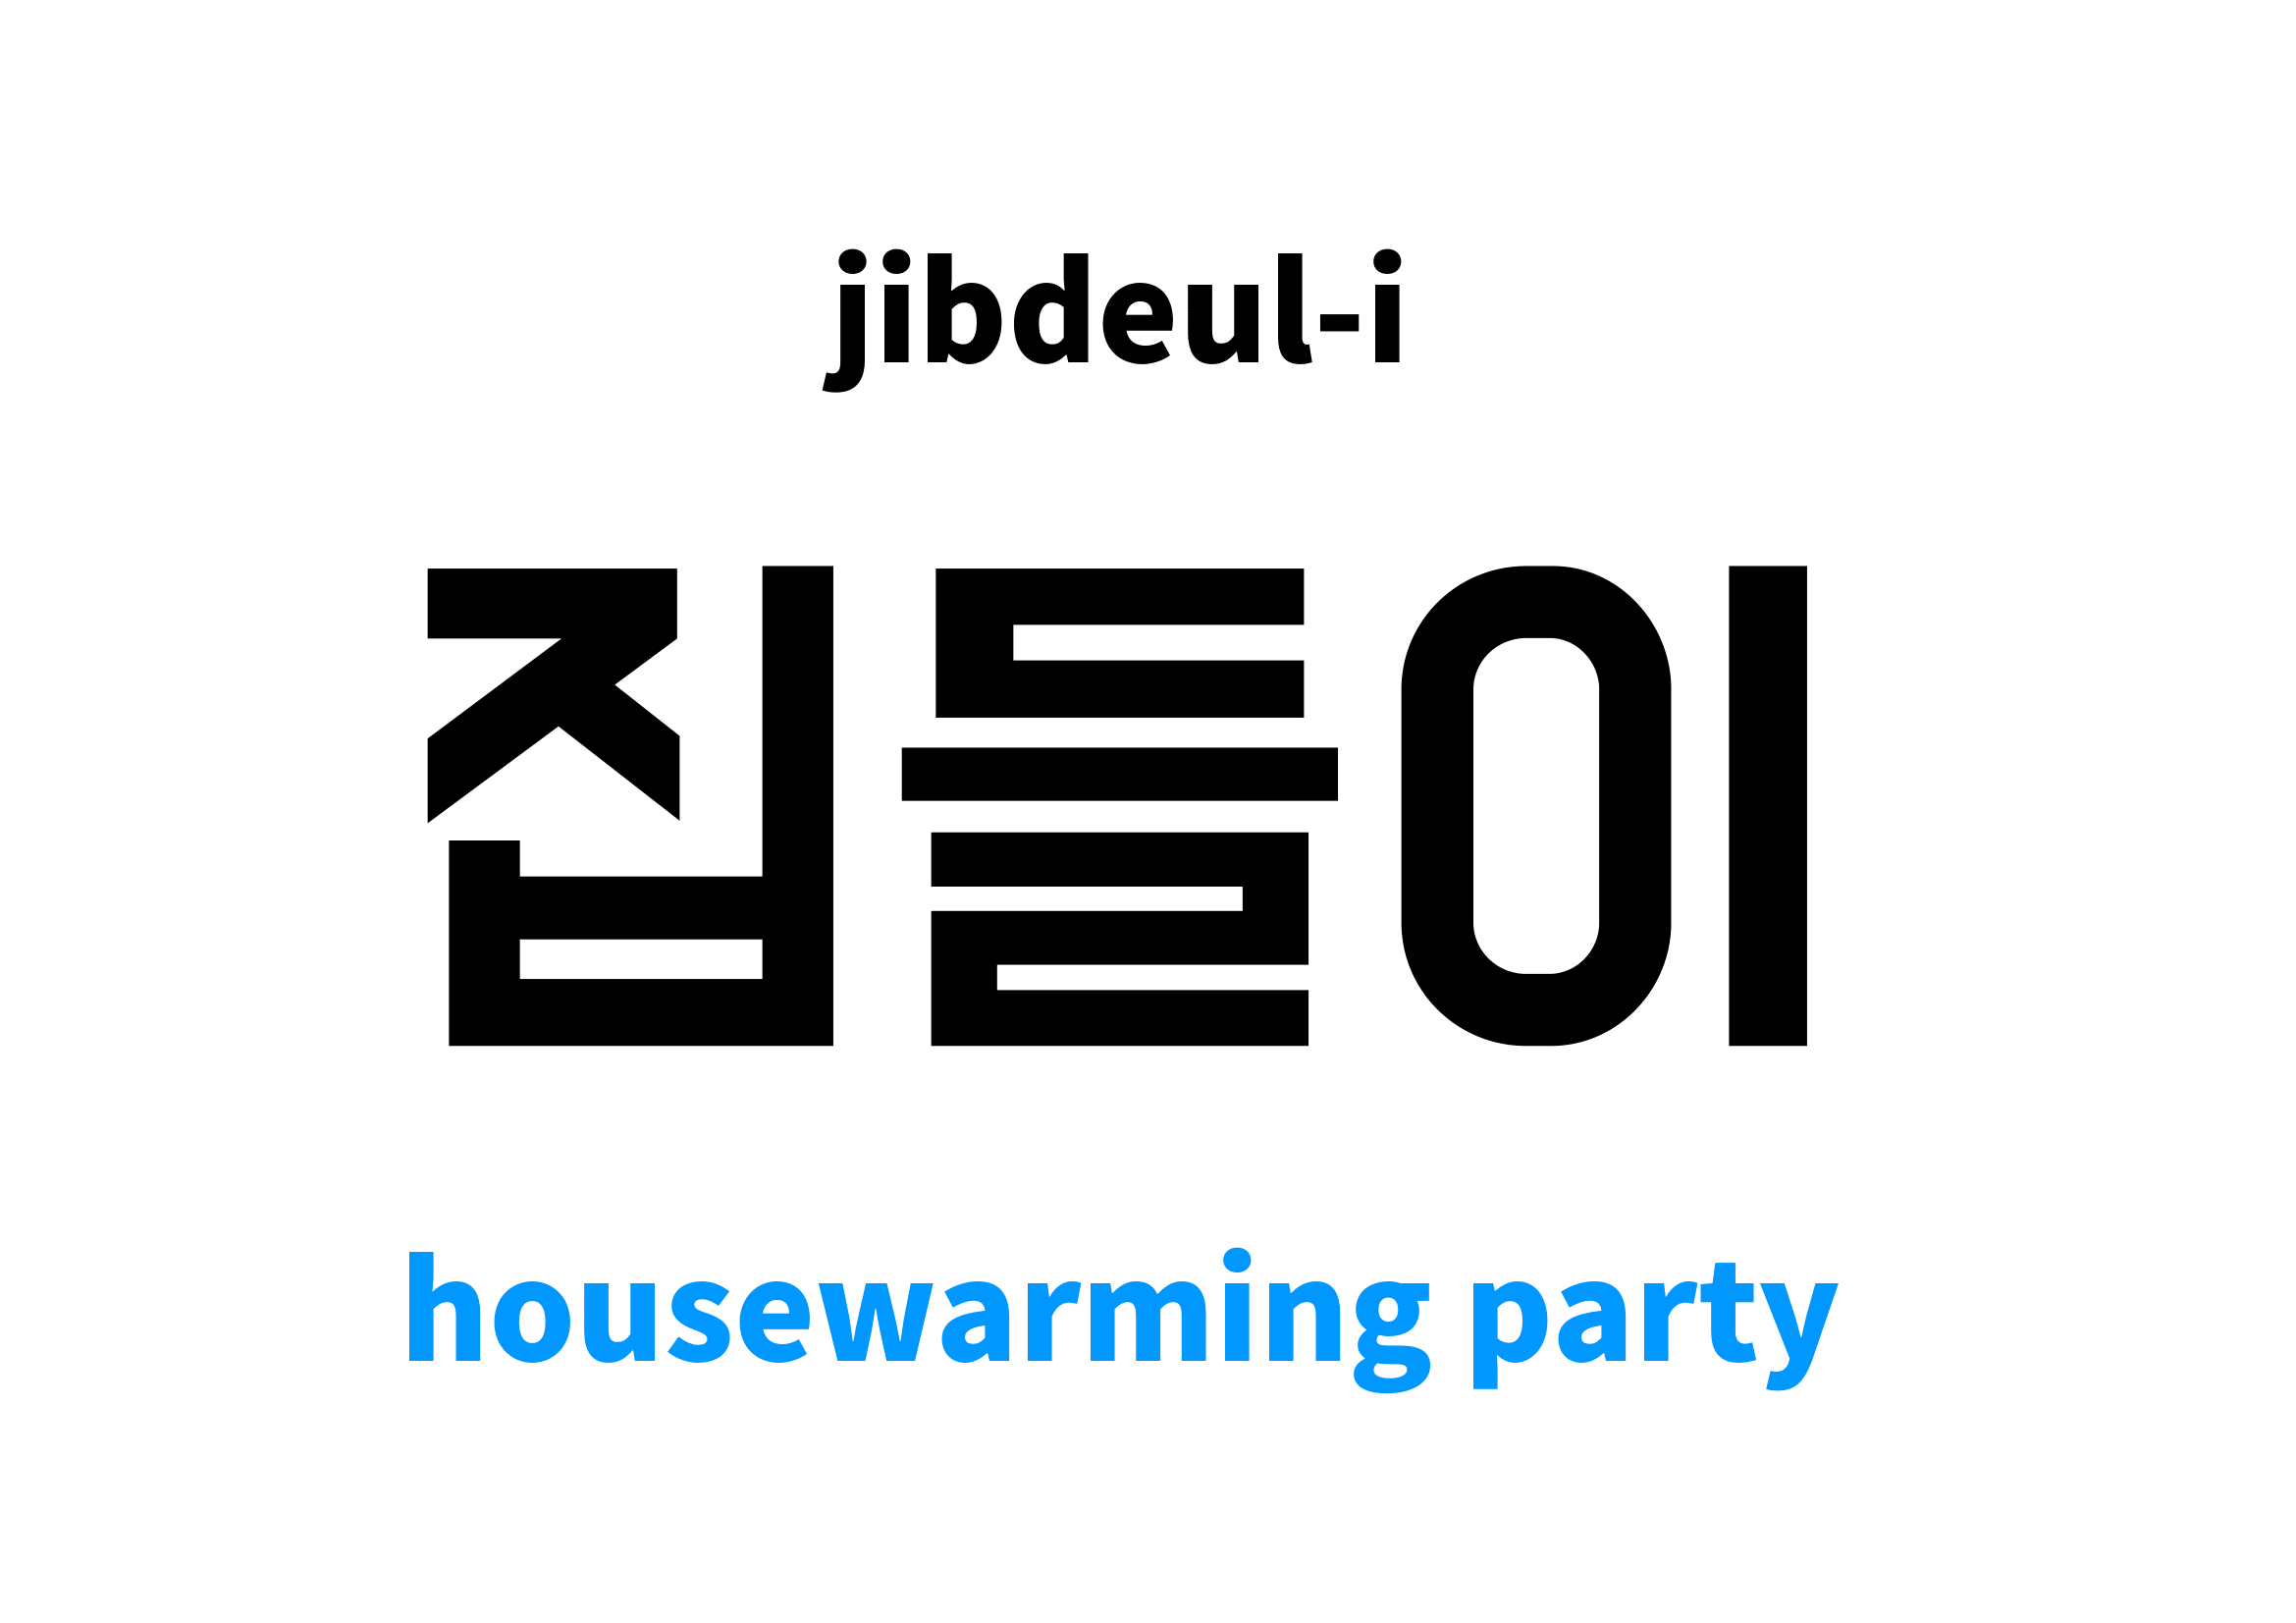 Housewarming Party in Korean, 집들이 meaning